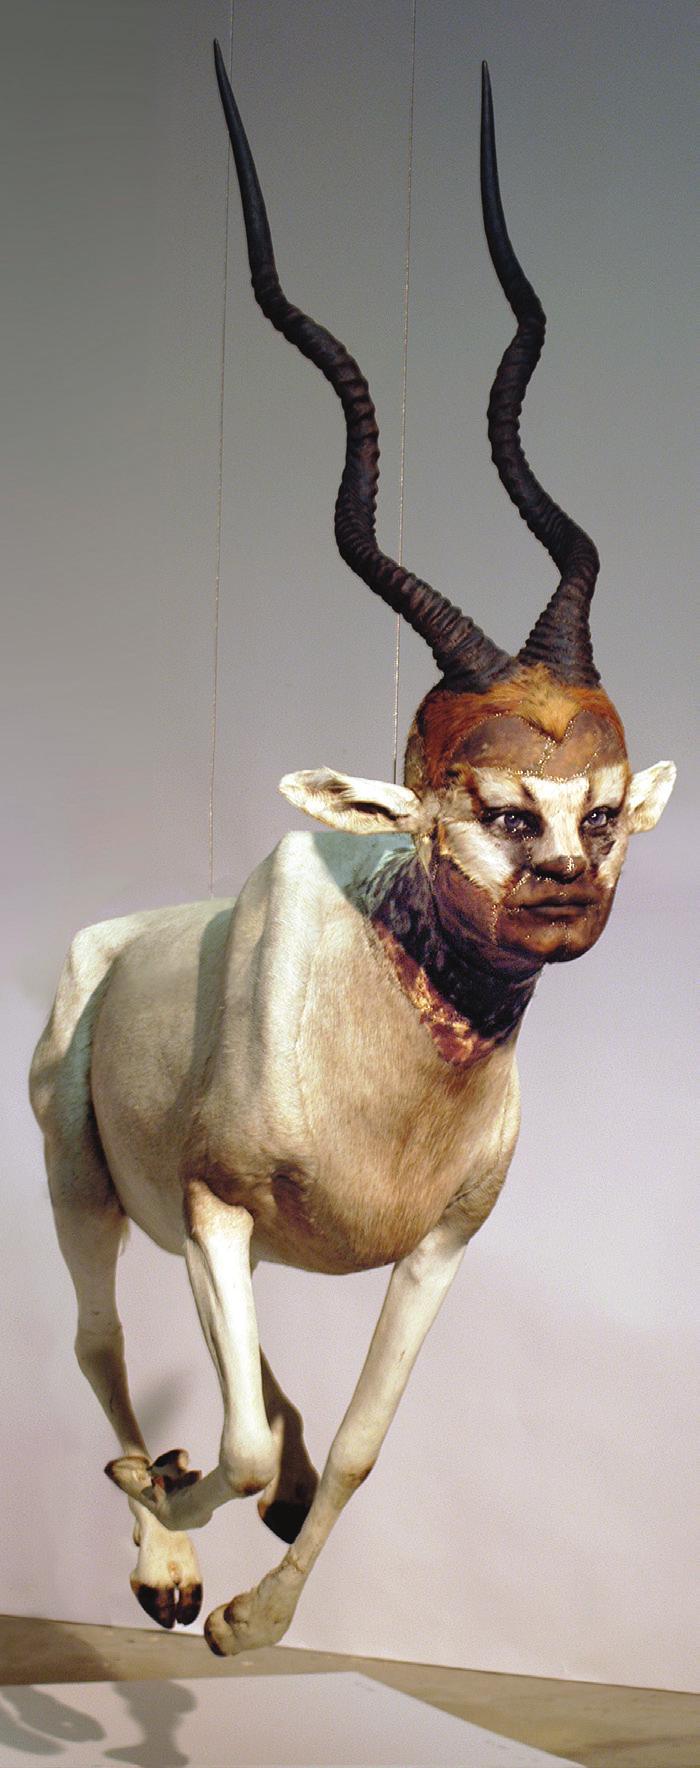 KATE CLARK MYSTERIOUS PRESENCE 20 January - 10 April 2016 Kate Clark uses the centuries-old craft of taxidermy to sculpt humanlike faces onto bestial forms.